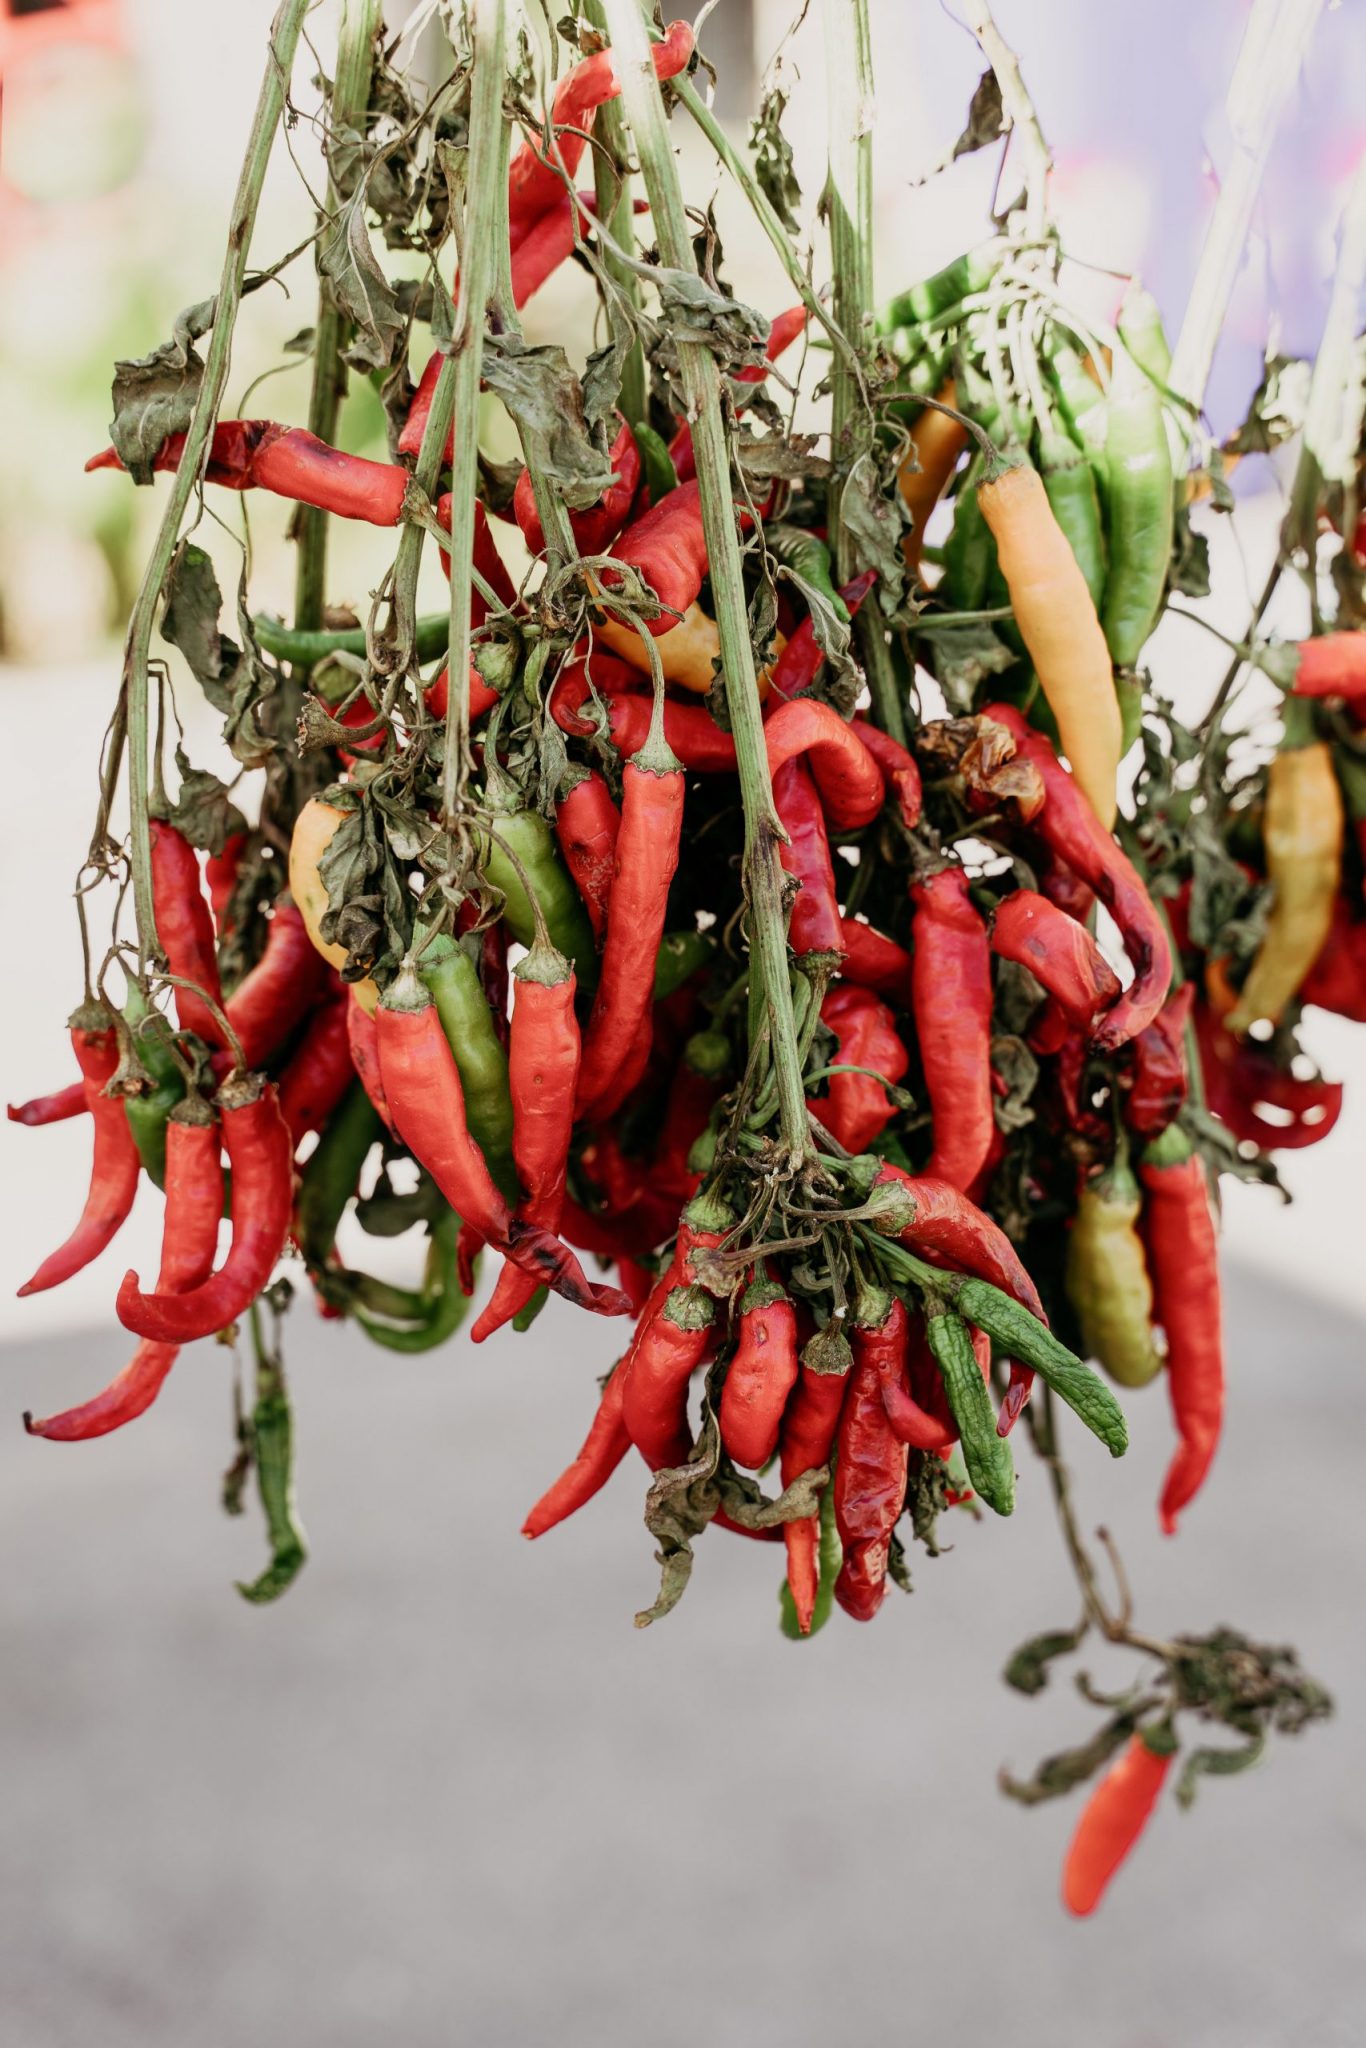 A photo of chilis from Italy